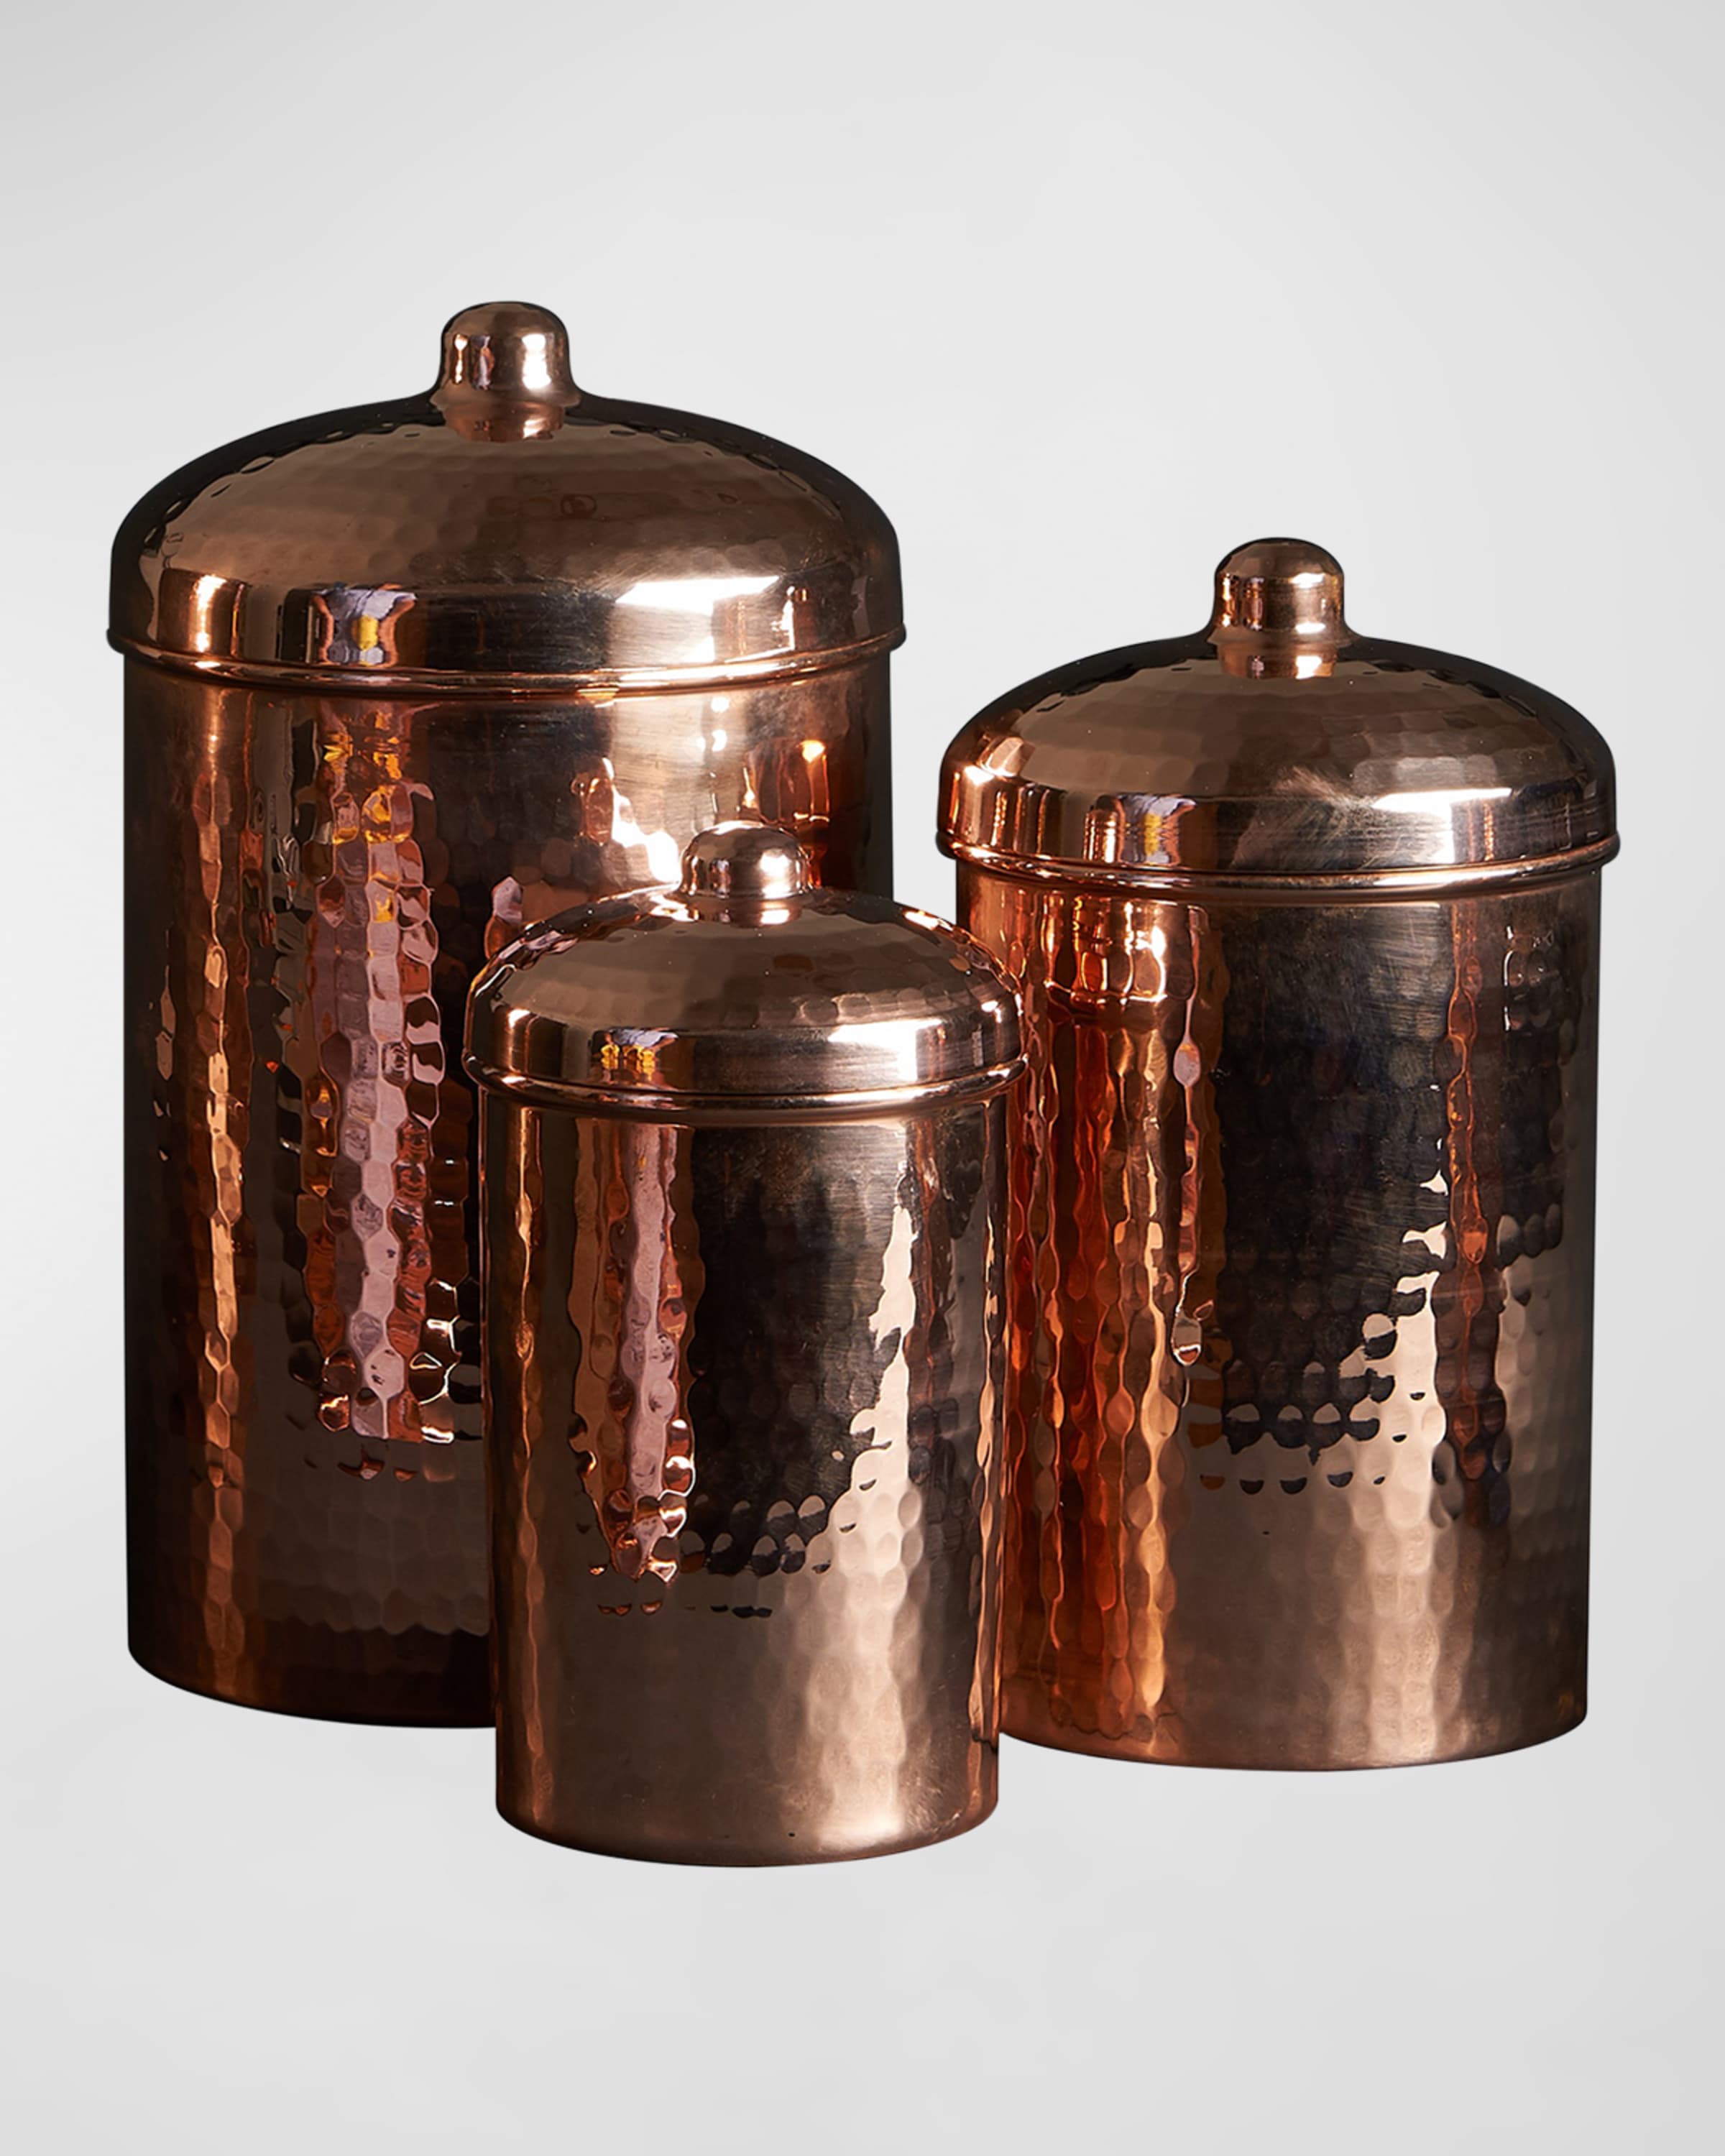 Handmade Copper Pots Guide: Which One Is The Best For You? - Sertodo